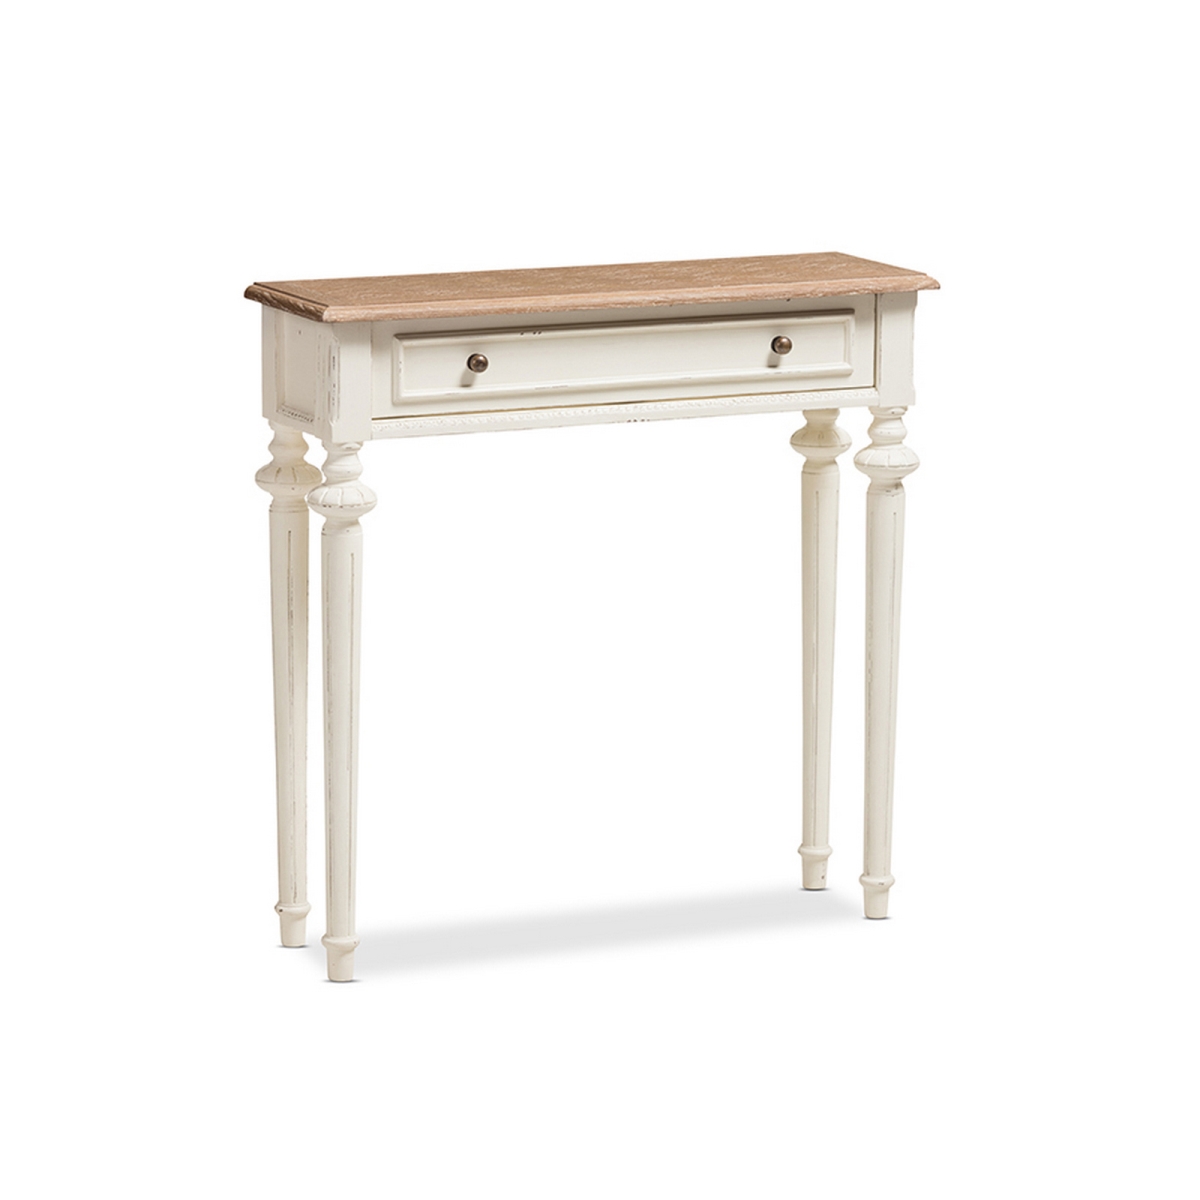 Urban Designs 370063 Weathered Oak White Wash Distressed Wood Two-tone Console Table - 31.5 X 31.5 X 9.84 In.